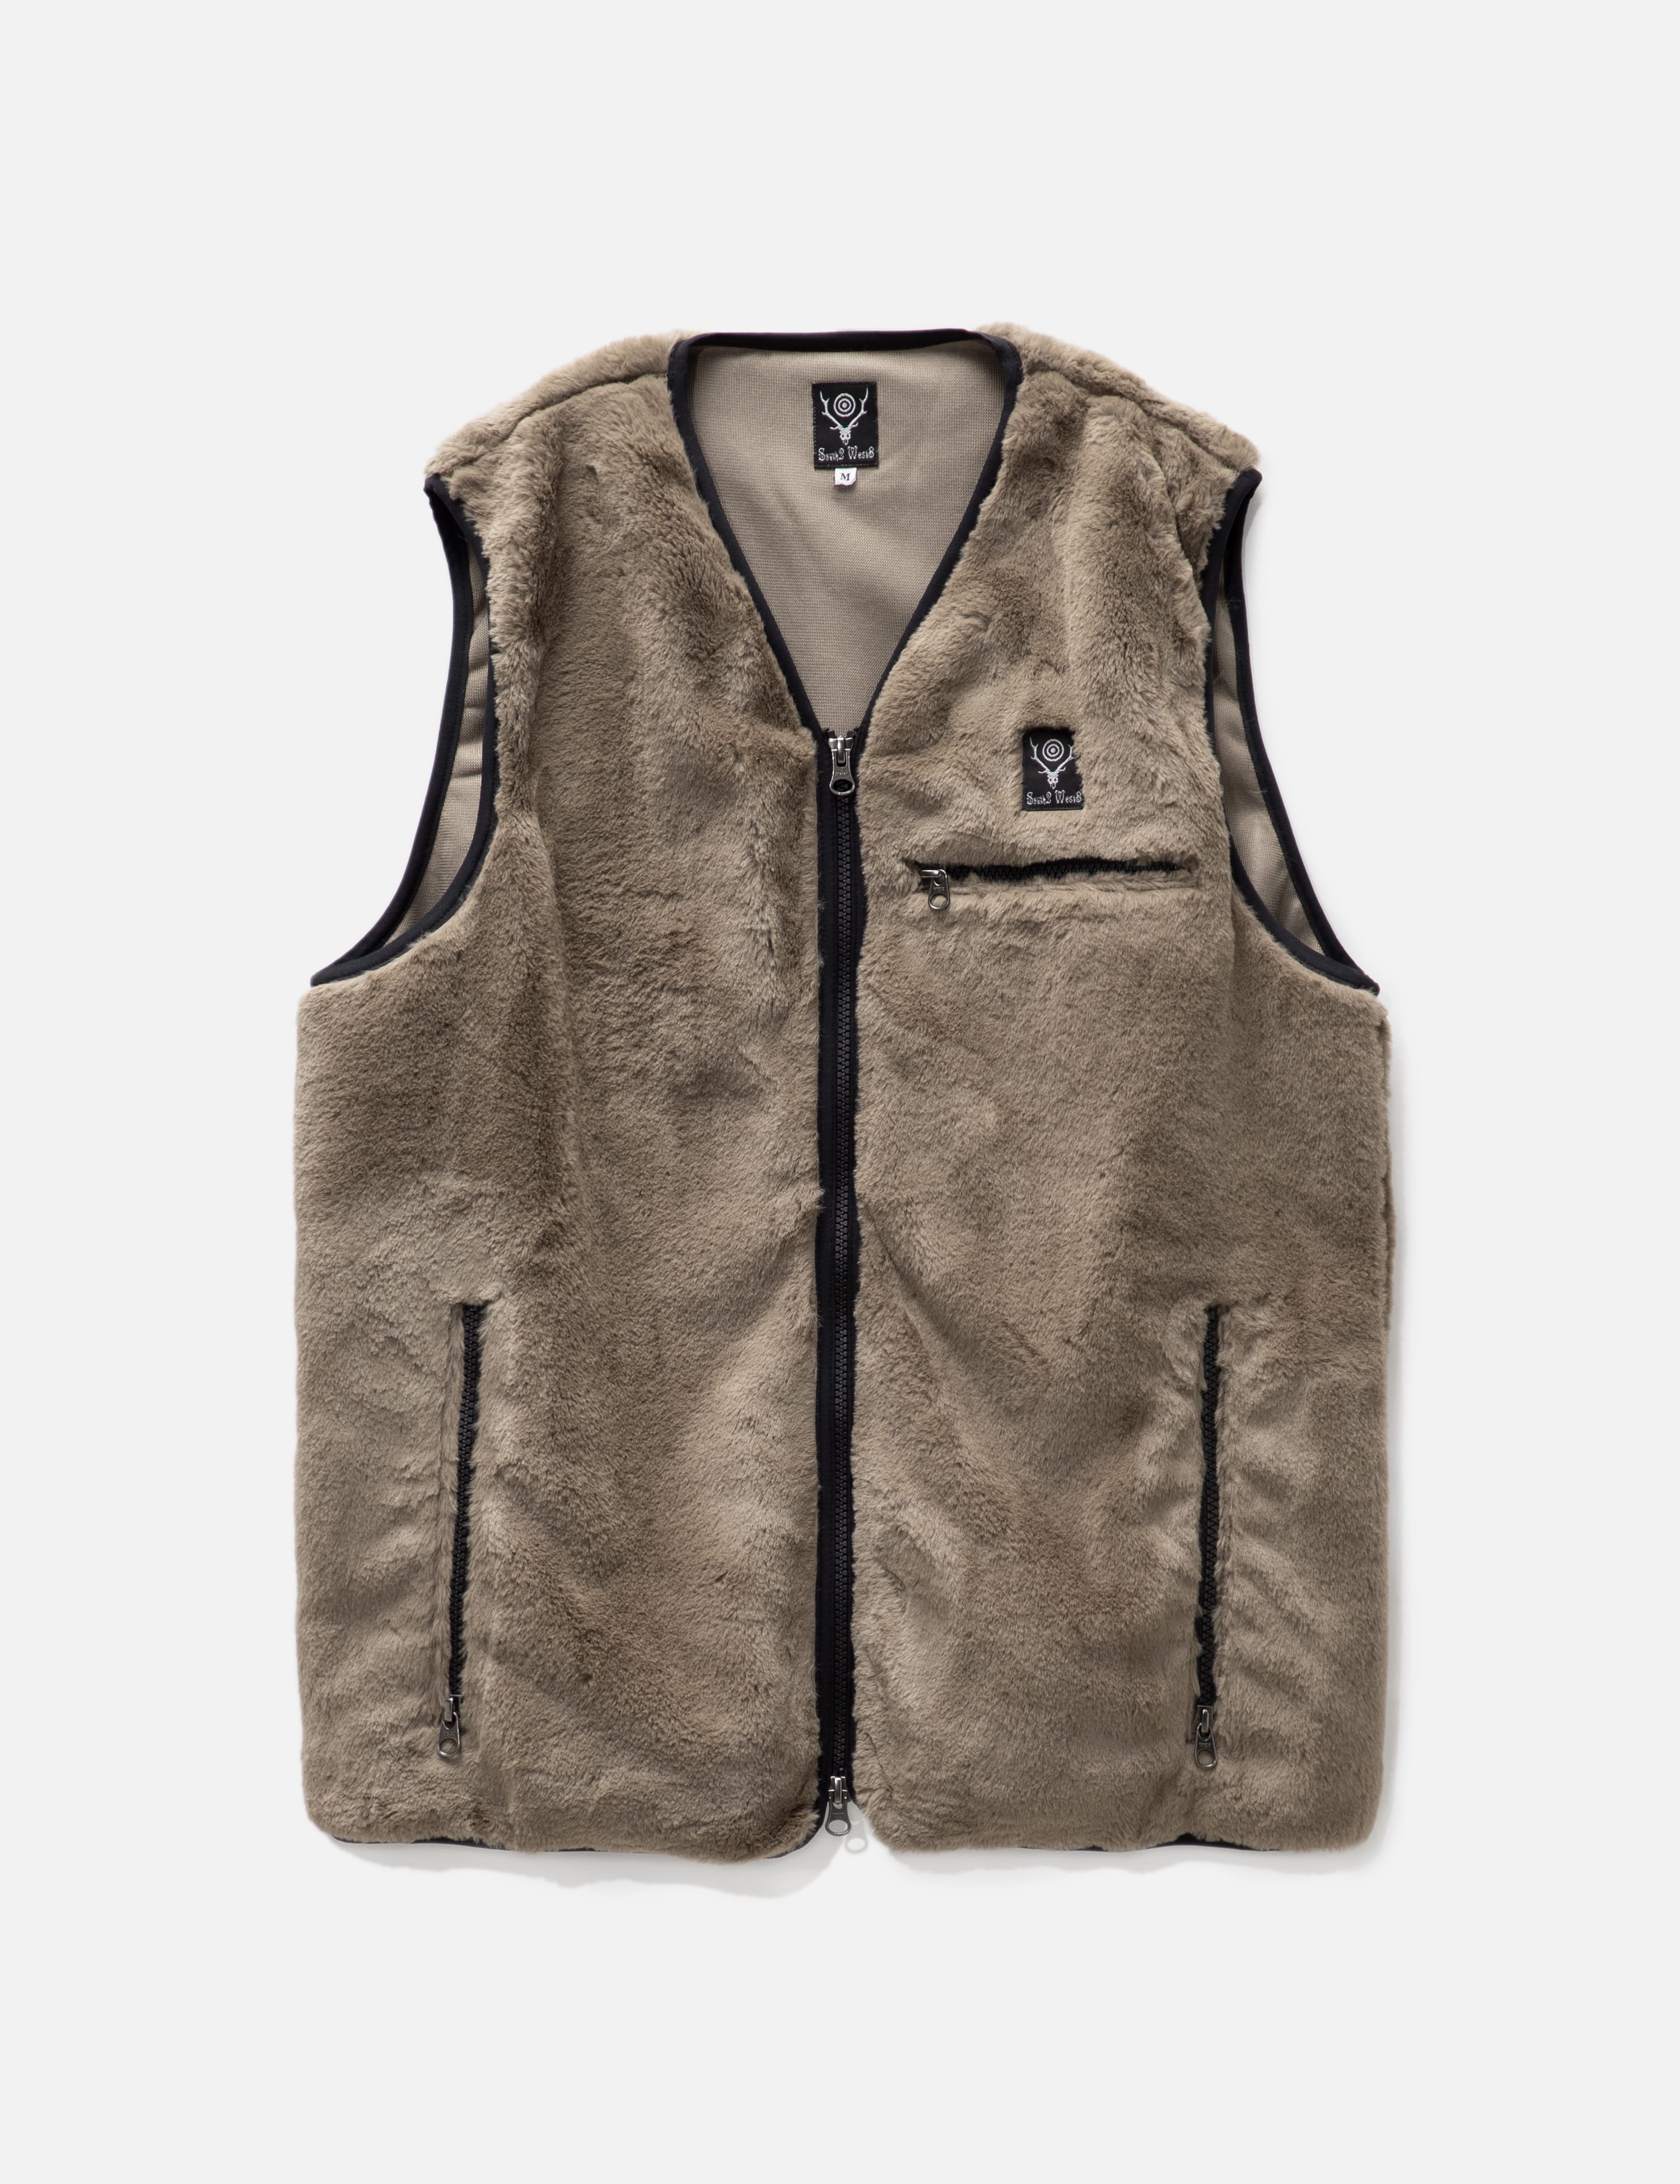 Stüssy - Insulated Work Vest | HBX - Globally Curated Fashion and